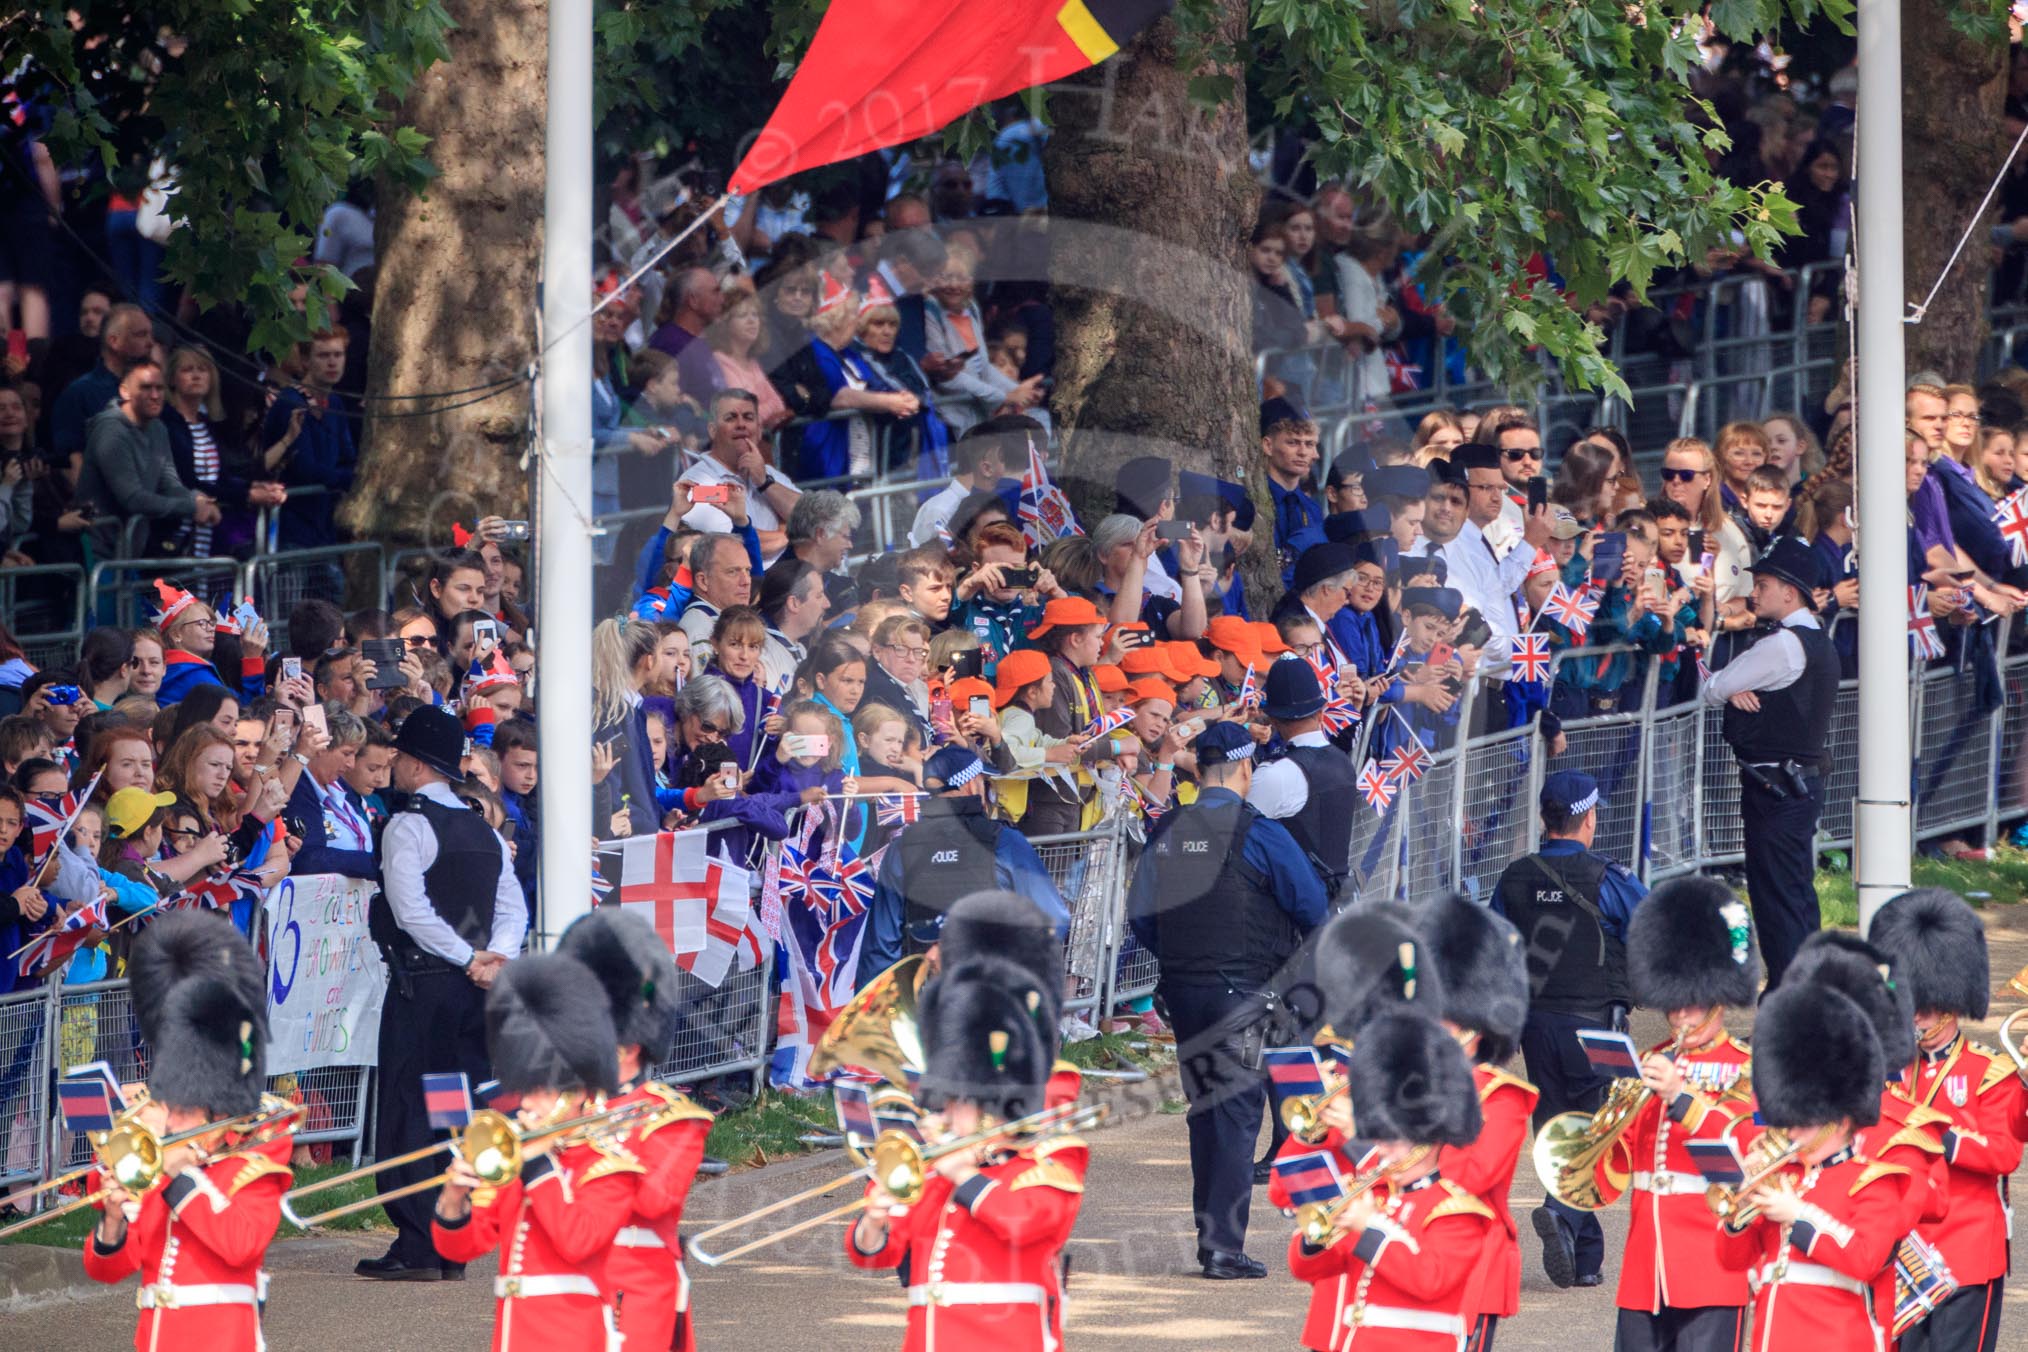 The crowded Youth Enclosure, with the Band of the Welsh Guards marching past, before Trooping the Colour 2018, The Queen's Birthday Parade at Horse Guards Parade, Westminster, London, 9 June 2018, 10:12.